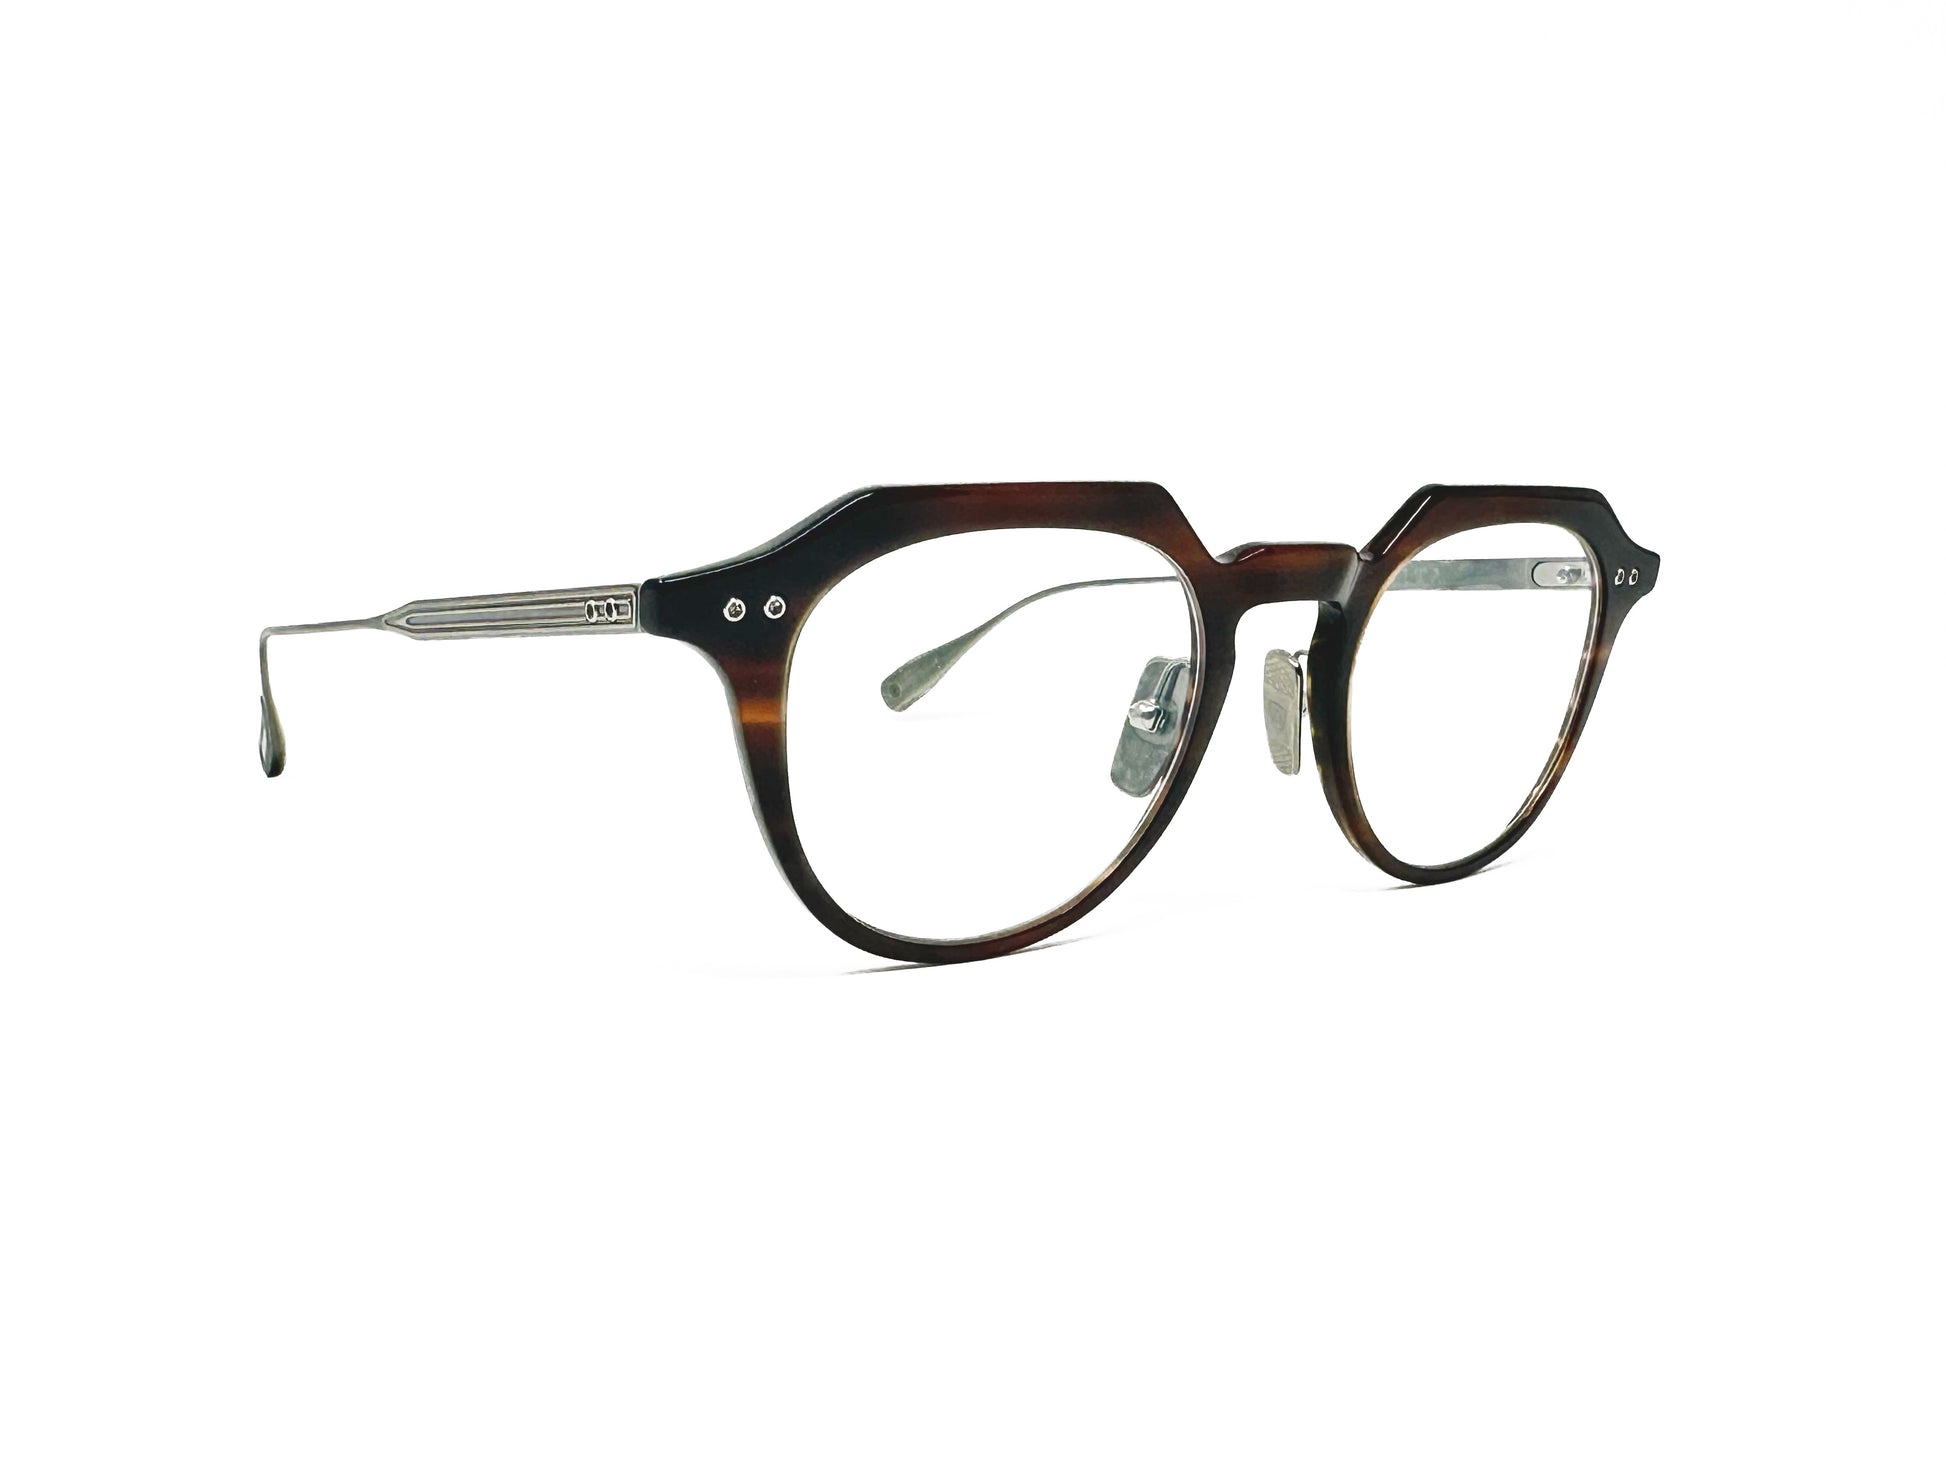 Dita Eyewear rounded optical frame with flat-top and keyhole bridge, acetate front with metal temples. Model: Oku. Color: 02 - Chestnut Swirl with antique silver temples. Side view.